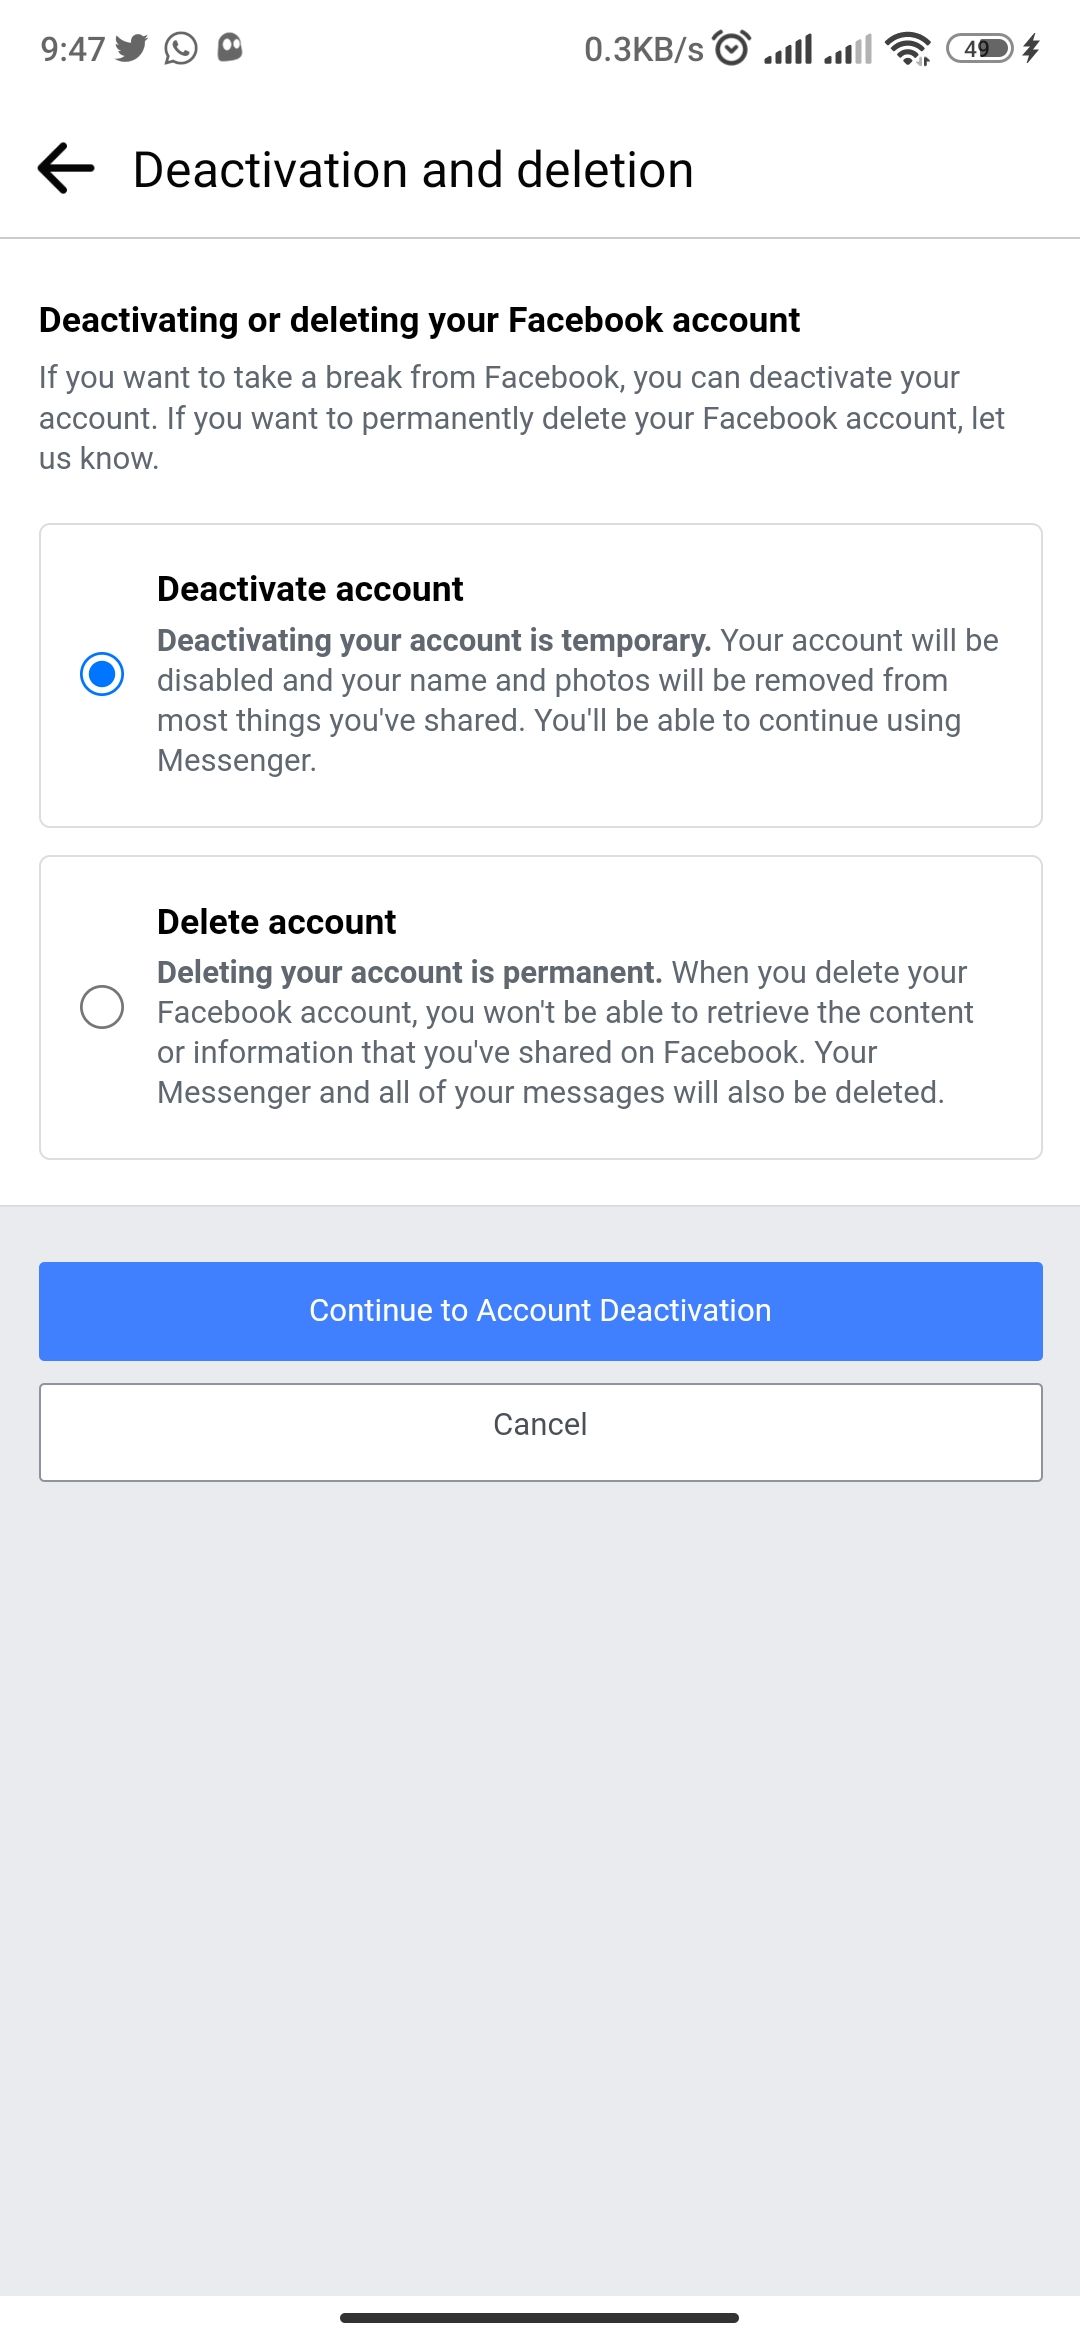 Deactivate account option on Facebook for Android